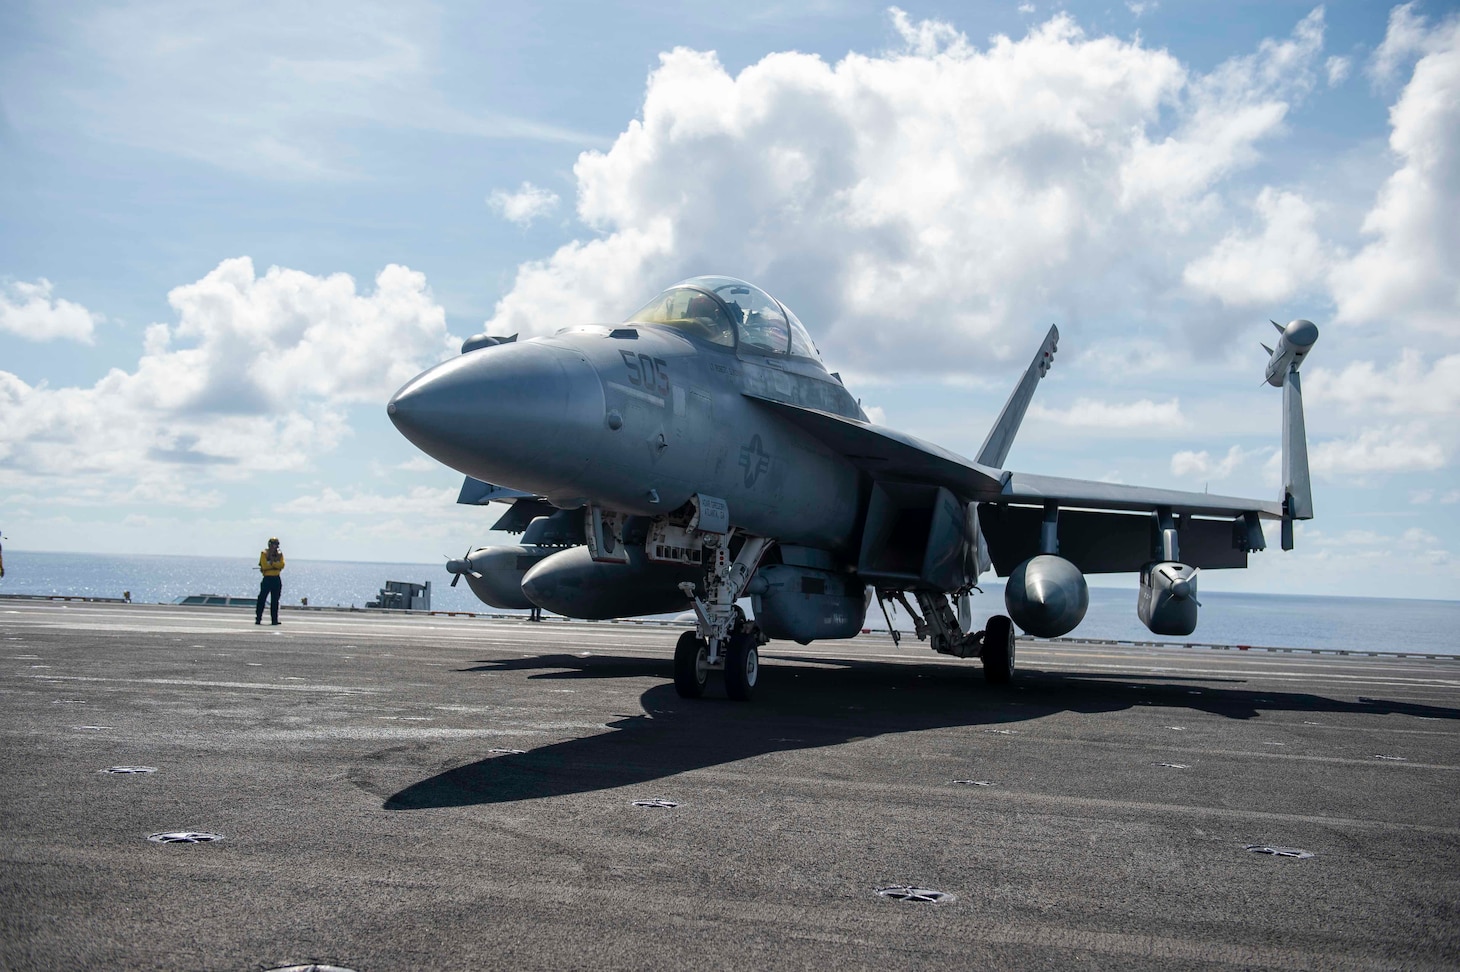 PACIFIC OCEAN (Aug. 26, 2021) An EA-18G Growler, assigned to the “Gauntlets” of Electronic Attack Squadron (VAQ) 136, awaits clearance on the flight deck aboard Nimitz-class aircraft carrier USS Carl Vinson (CVN 70), Aug. 26, 2021. Carl Vinson Carrier Strike Group is on a rotational deployment in the U.S. 7th Fleet area of operations to enhance interoperability with allies and partners, and to serve as a ready-response force in support of a free and open Indo-Pacific region. (U.S. Navy photo by Mass Communication Specialist Seaman Isaiah Williams)